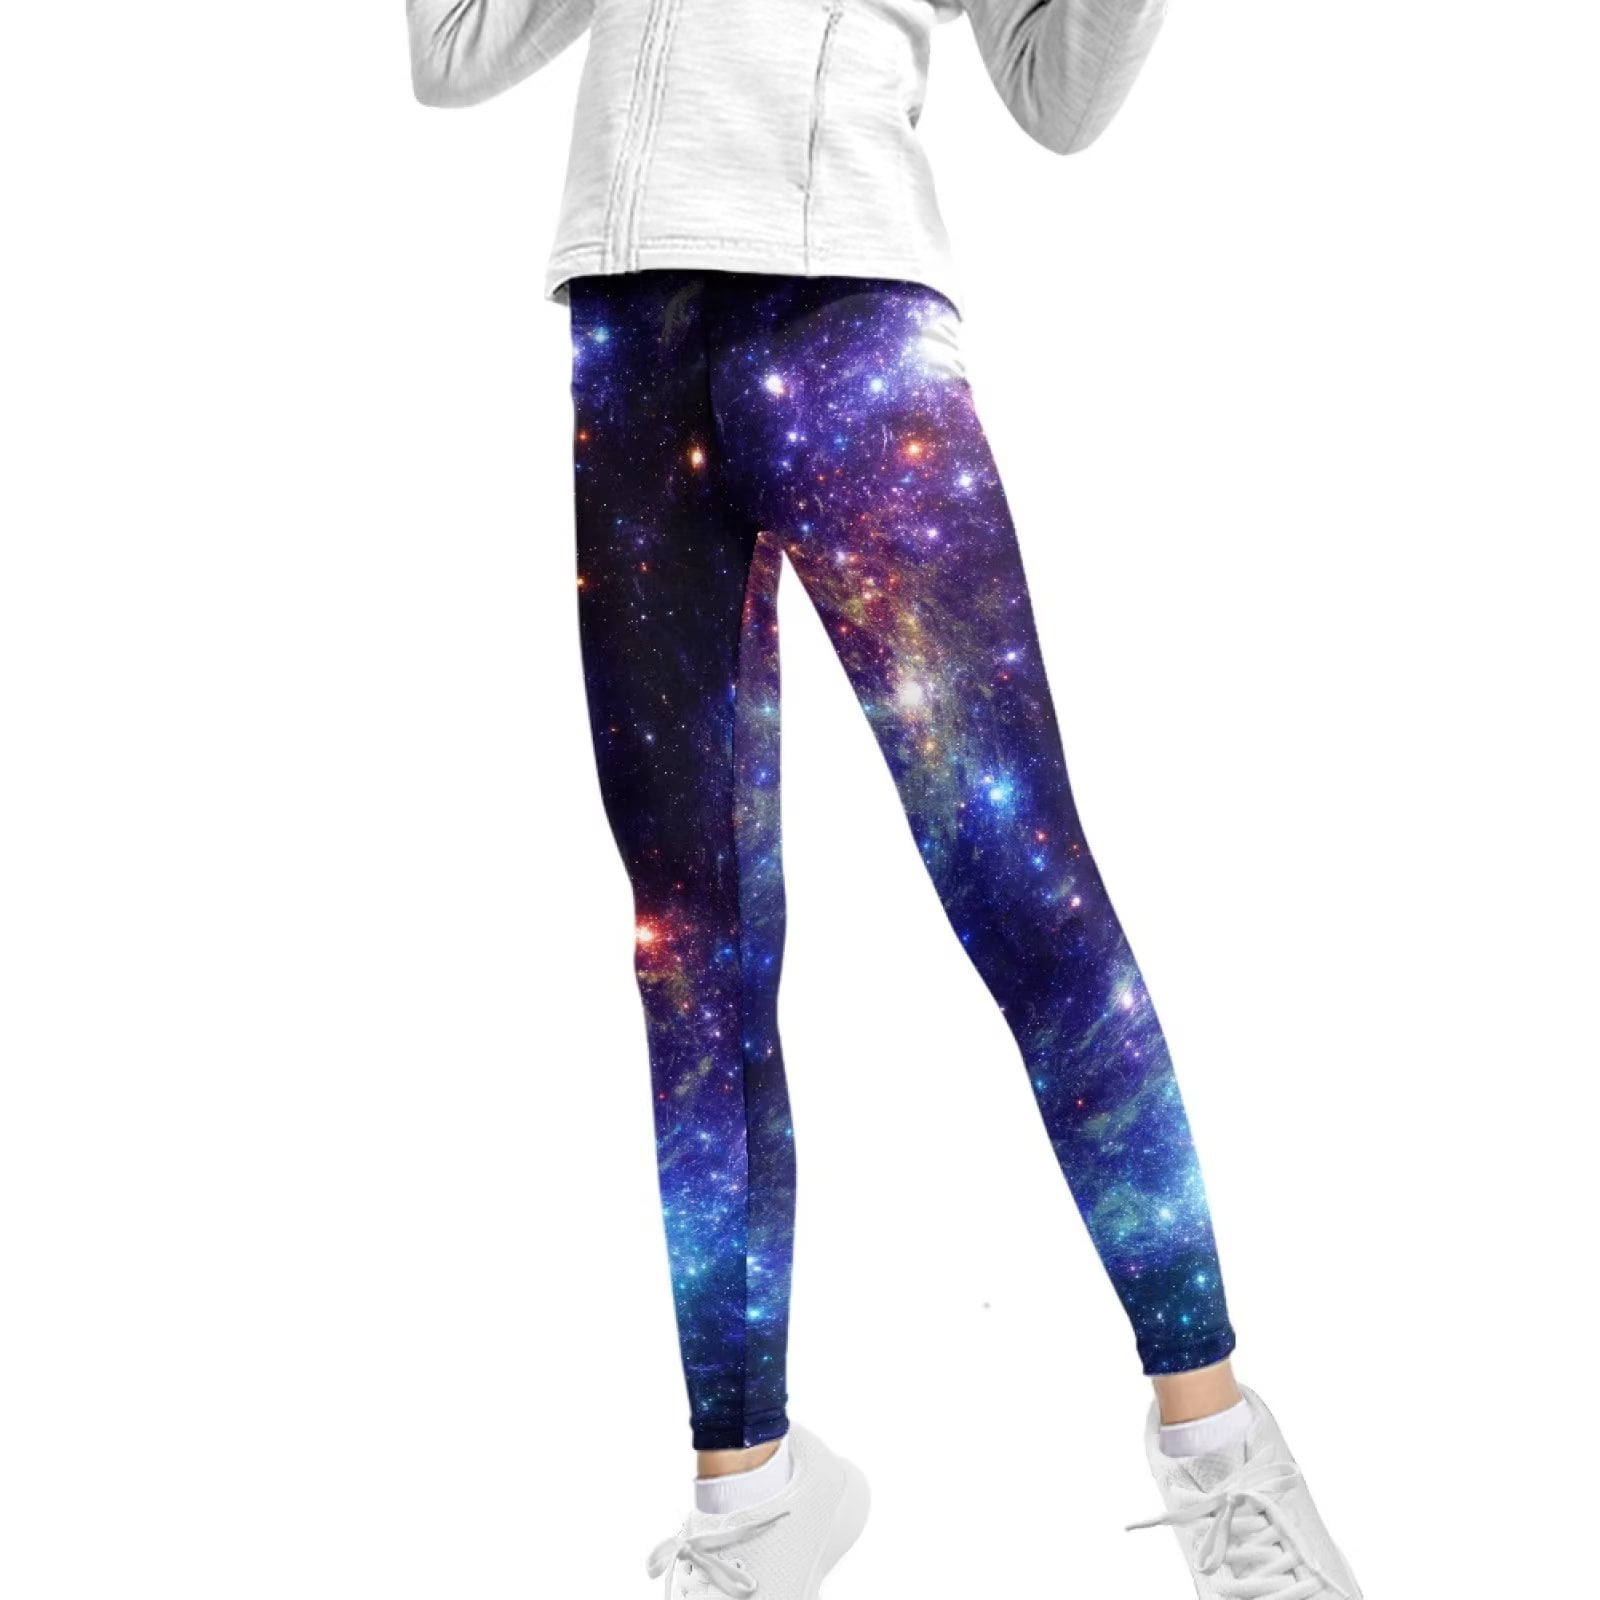 FKELYI Space Star Print Cool Kids Leggings Size 12-13 Years Stretchy Running  Tights Teen Girls Durable Travel Yoga Pants High Waisted Butt Lift 